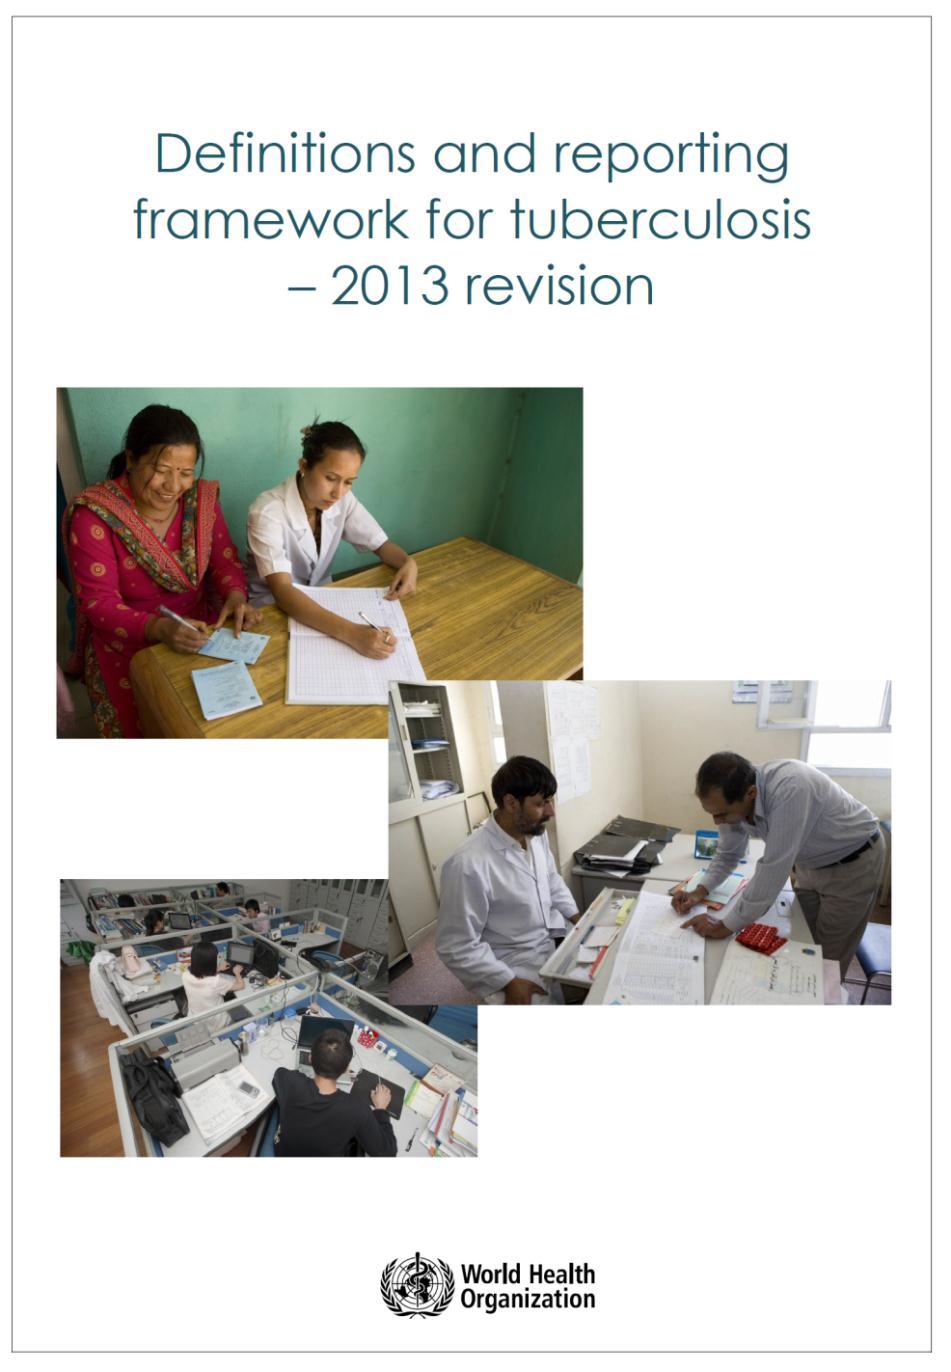 2-year revision process WHO/HTM/TB/2013.2 2 www.who.